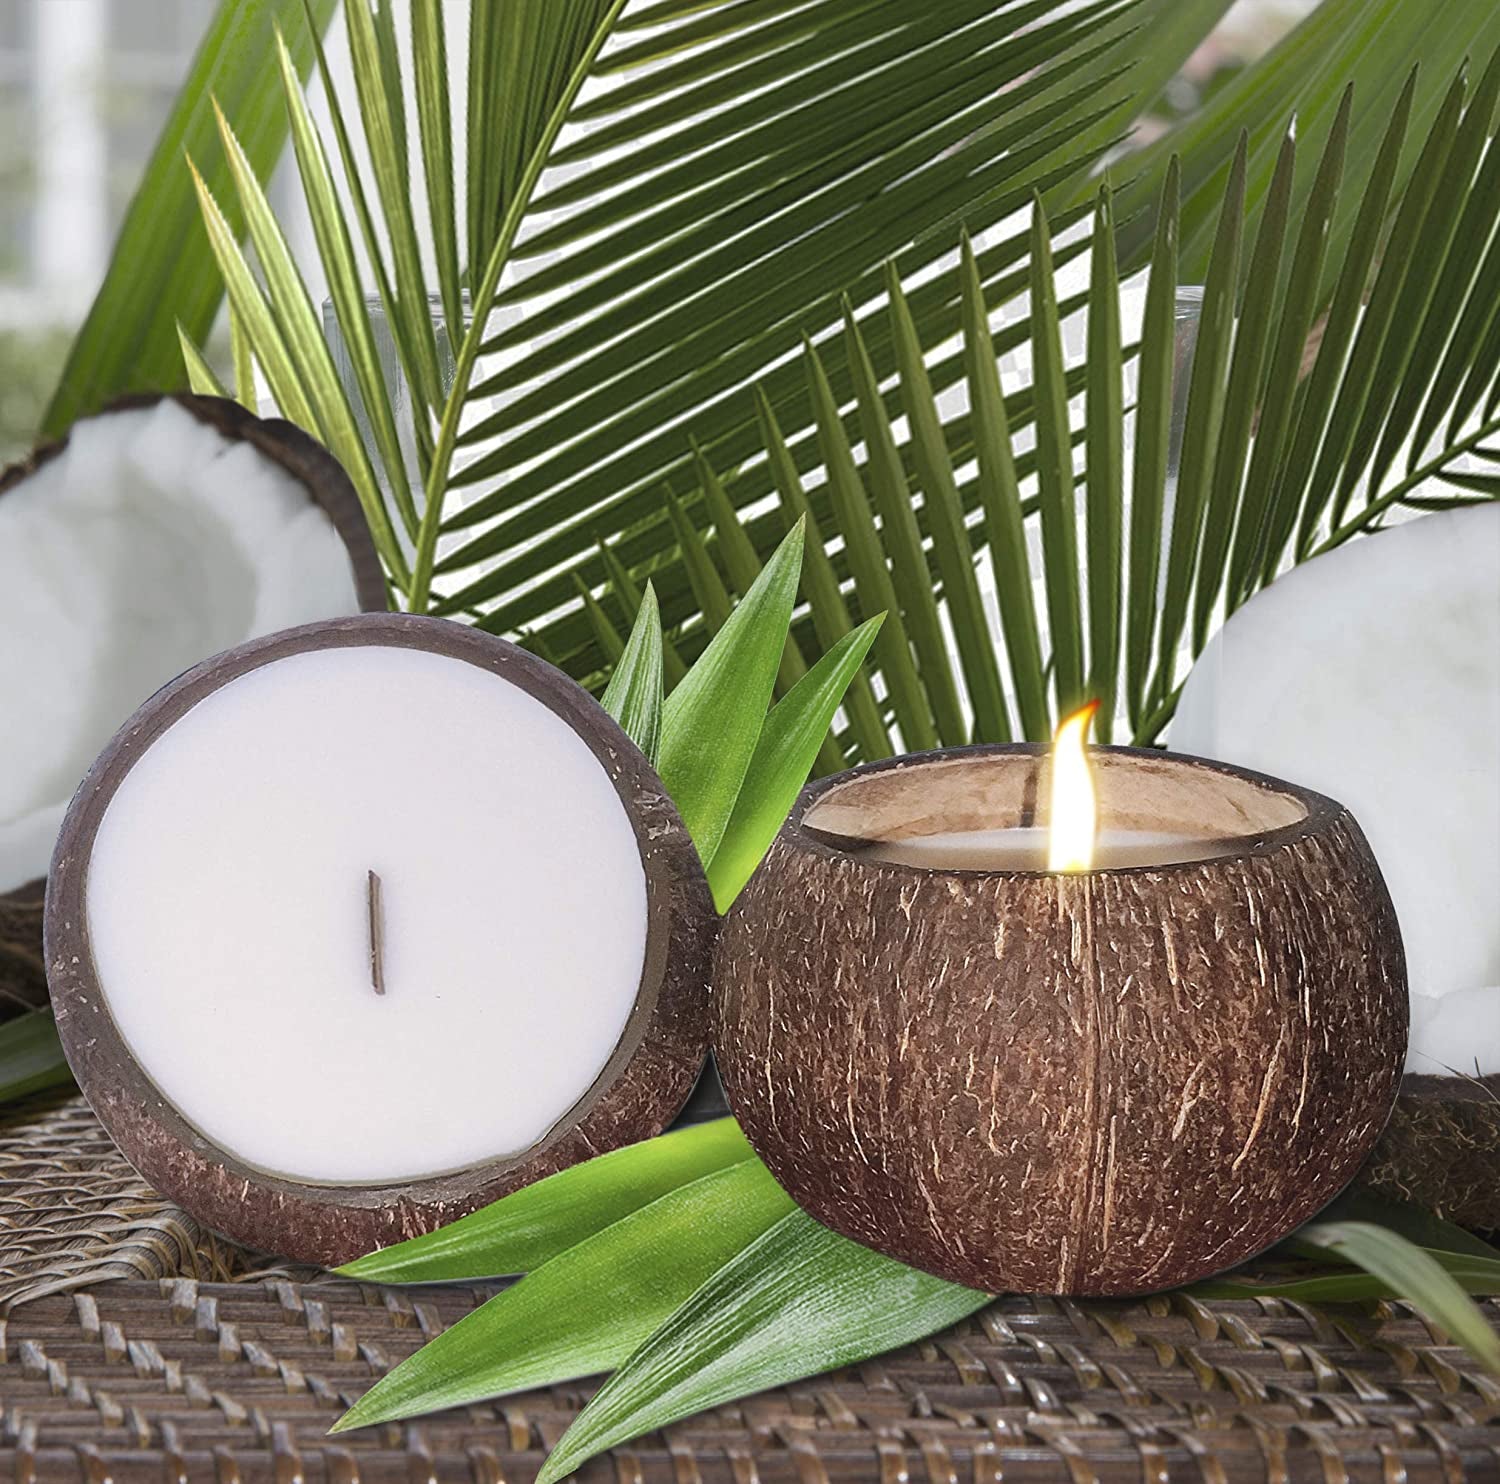 Jasmine Scented Coconut Bowl Candle – 14Oz Premium Soy – Wood Wicked Scented Candle – Natural Coconut Shell – Eco Friendly – Ideal for Home and Beach Décor – Aromatherapy Candle